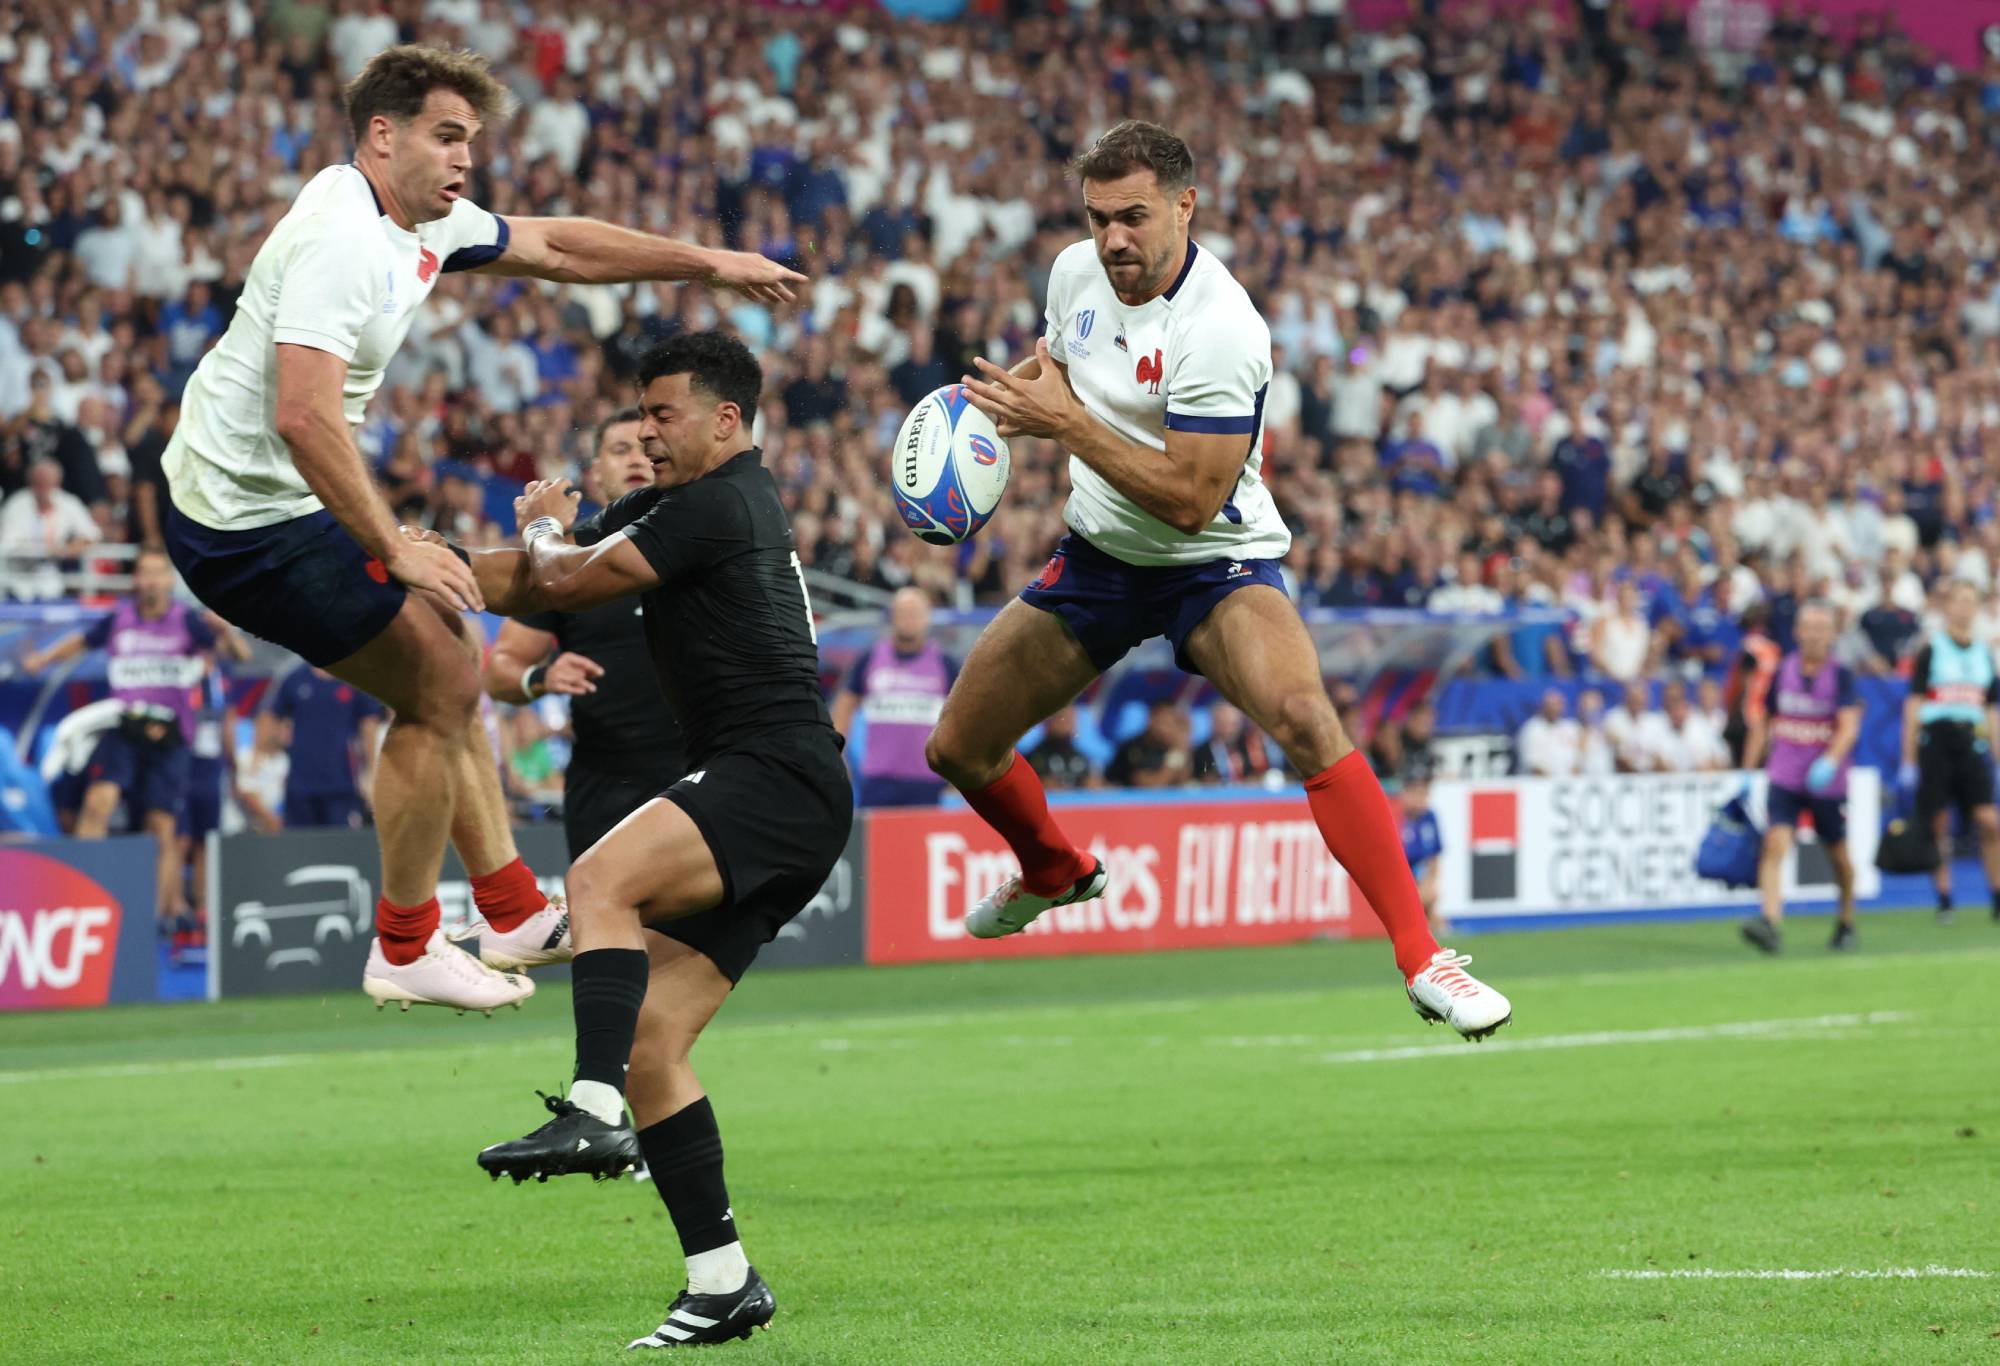 Melvyn Jaminet #23 of Team France scores his first try with Damian Penaud #14 during the Rugby World Cup France 2023 match between France and New Zealand at Stade de France on September 08, 2023 in Paris, France. (Photo by Xavier Laine/Getty Images)